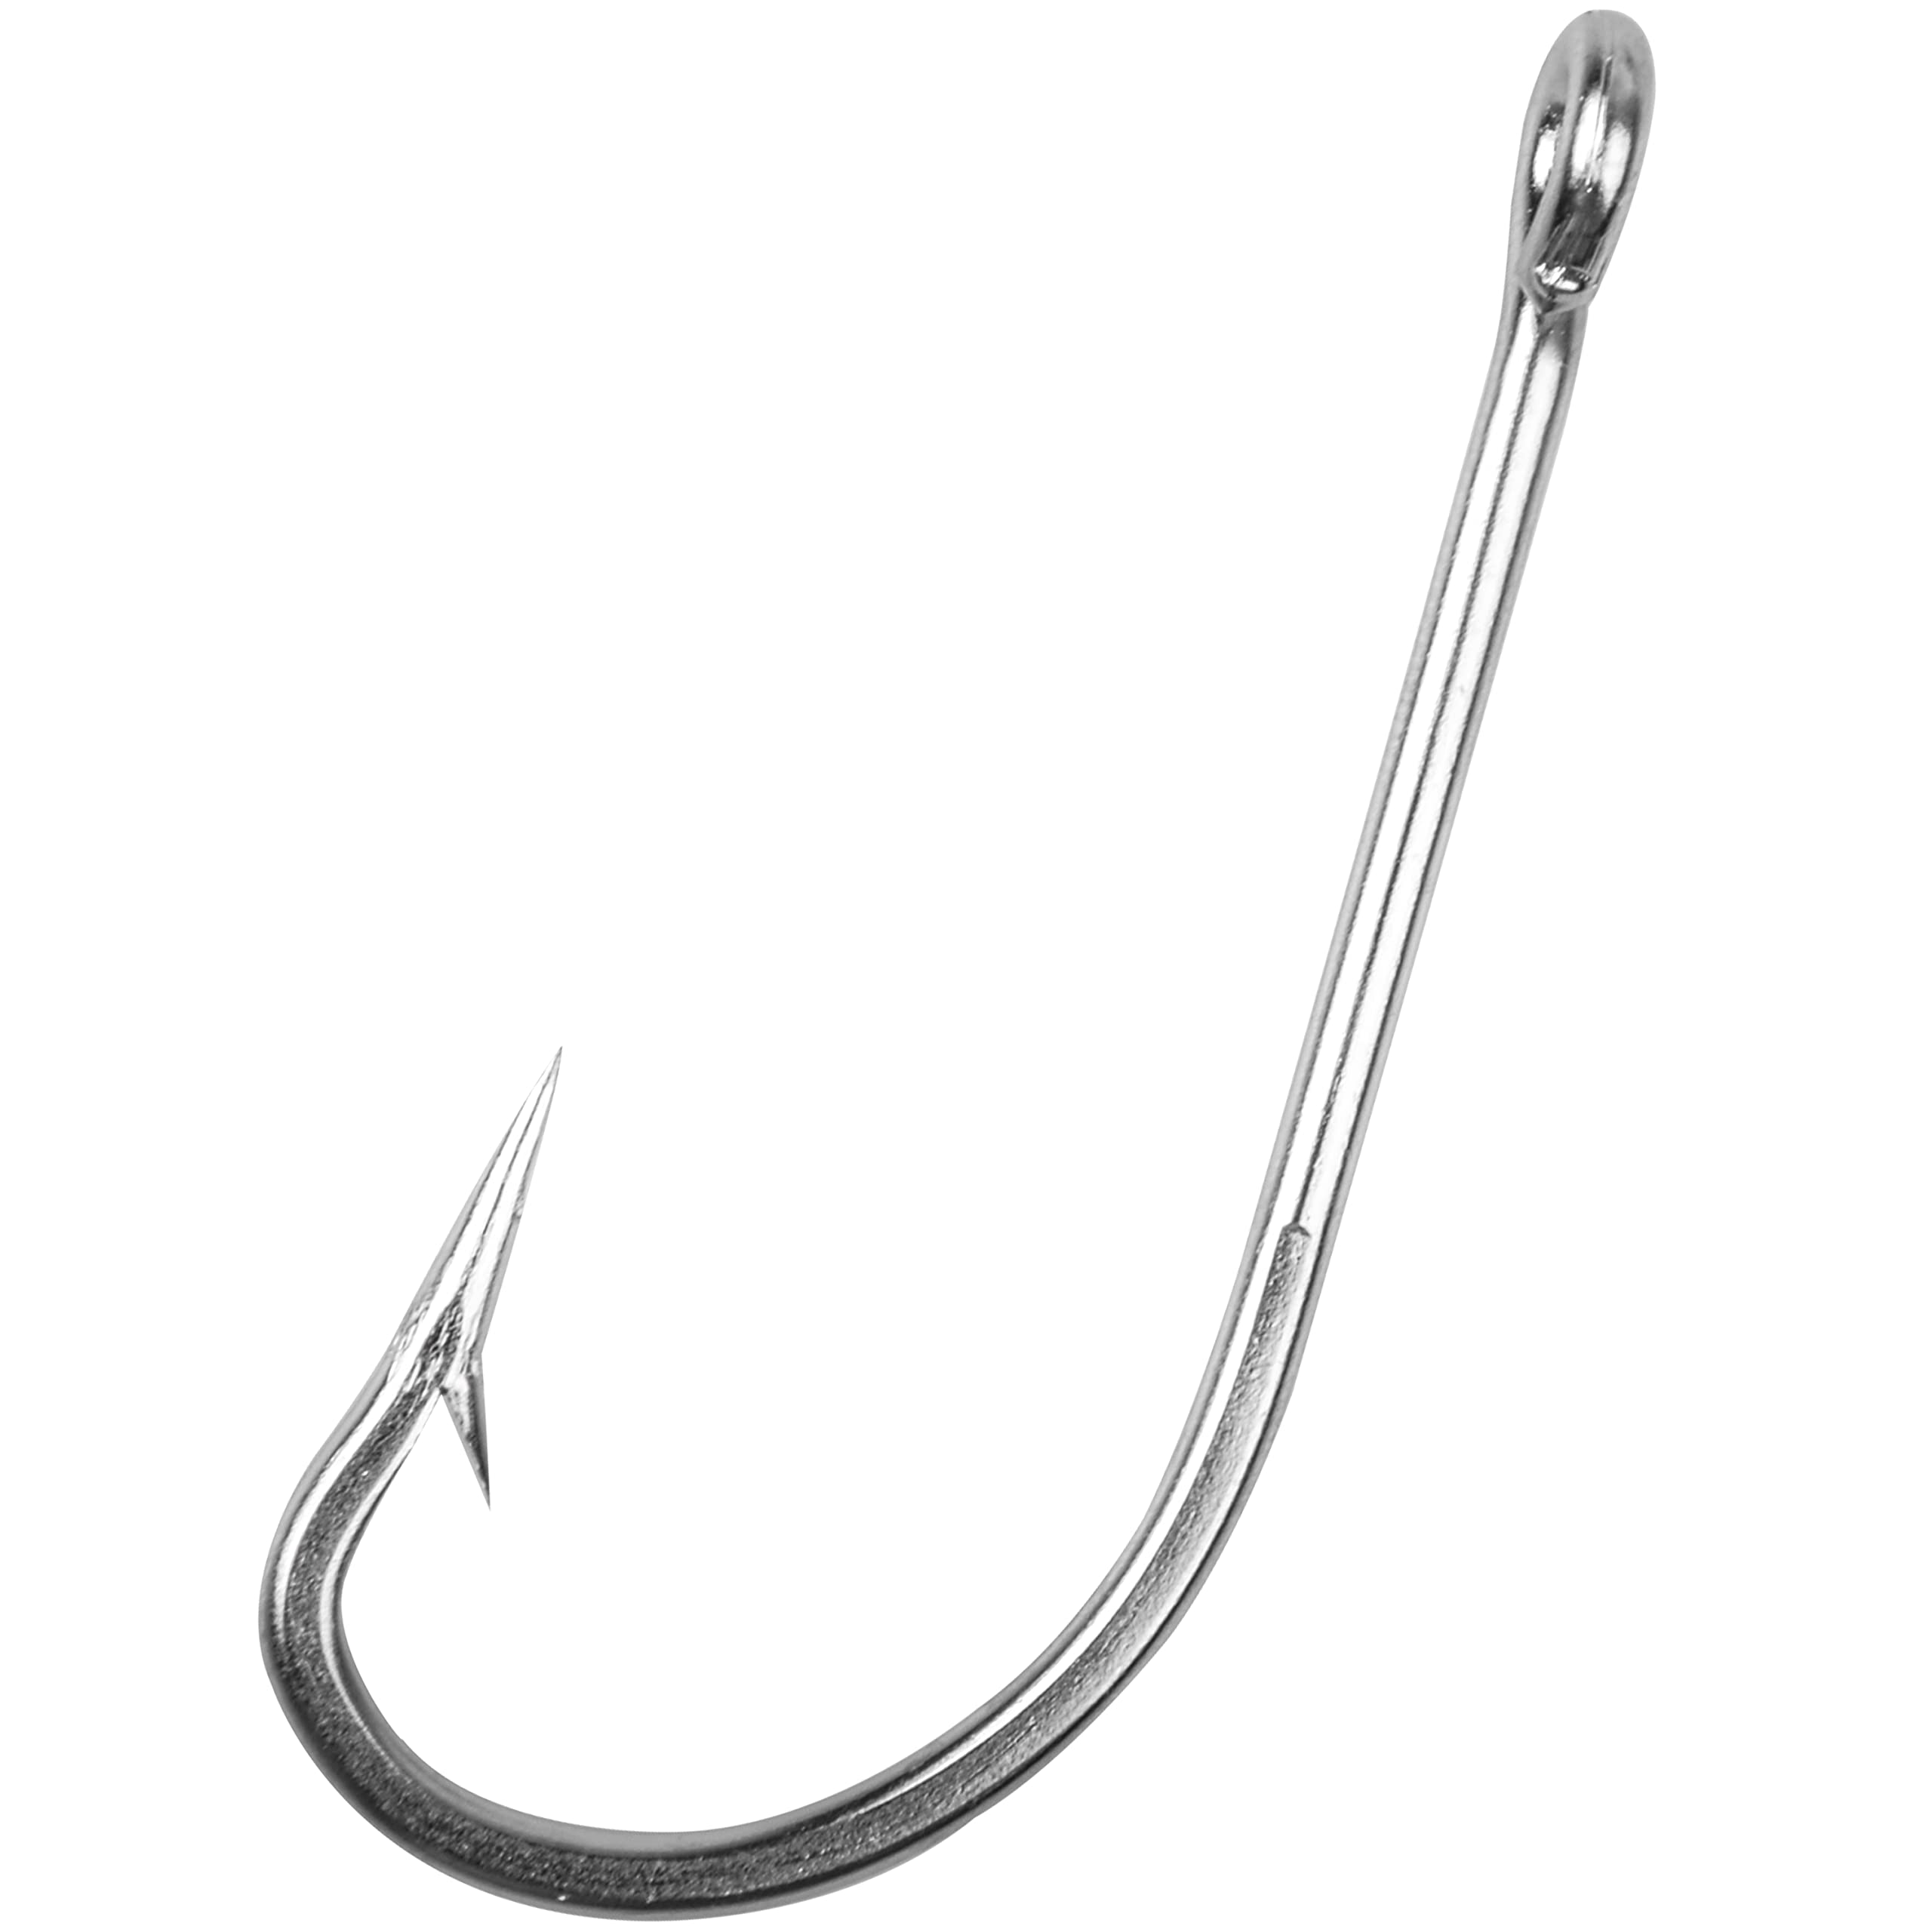 Stainless Steel Hooks at